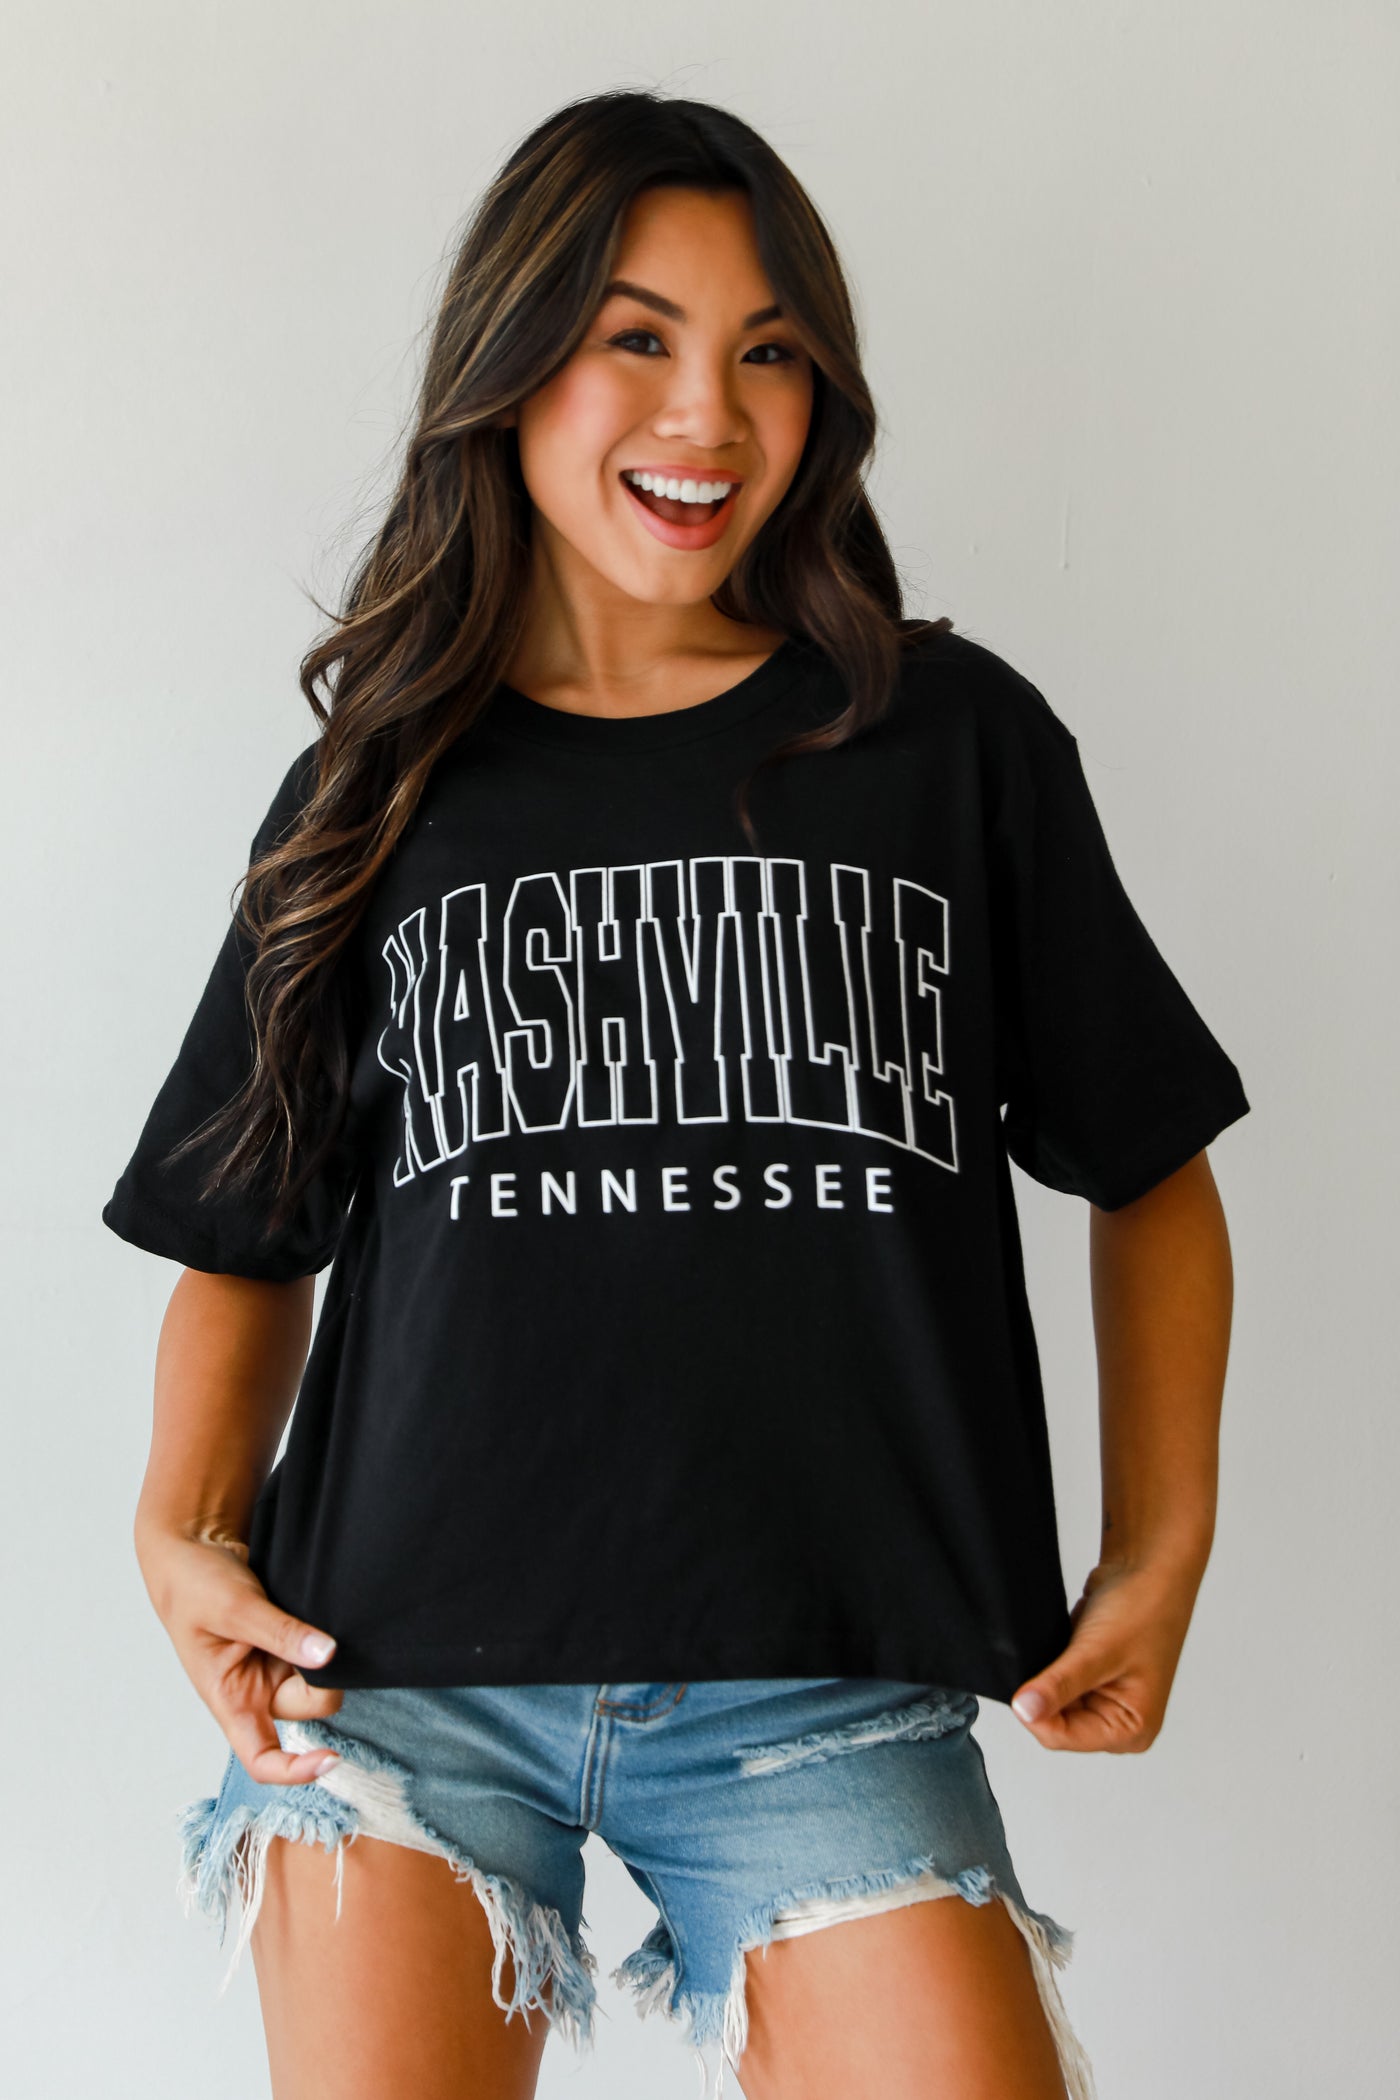 Black Nashville Tennessee Cropped Block Letter Tee front view